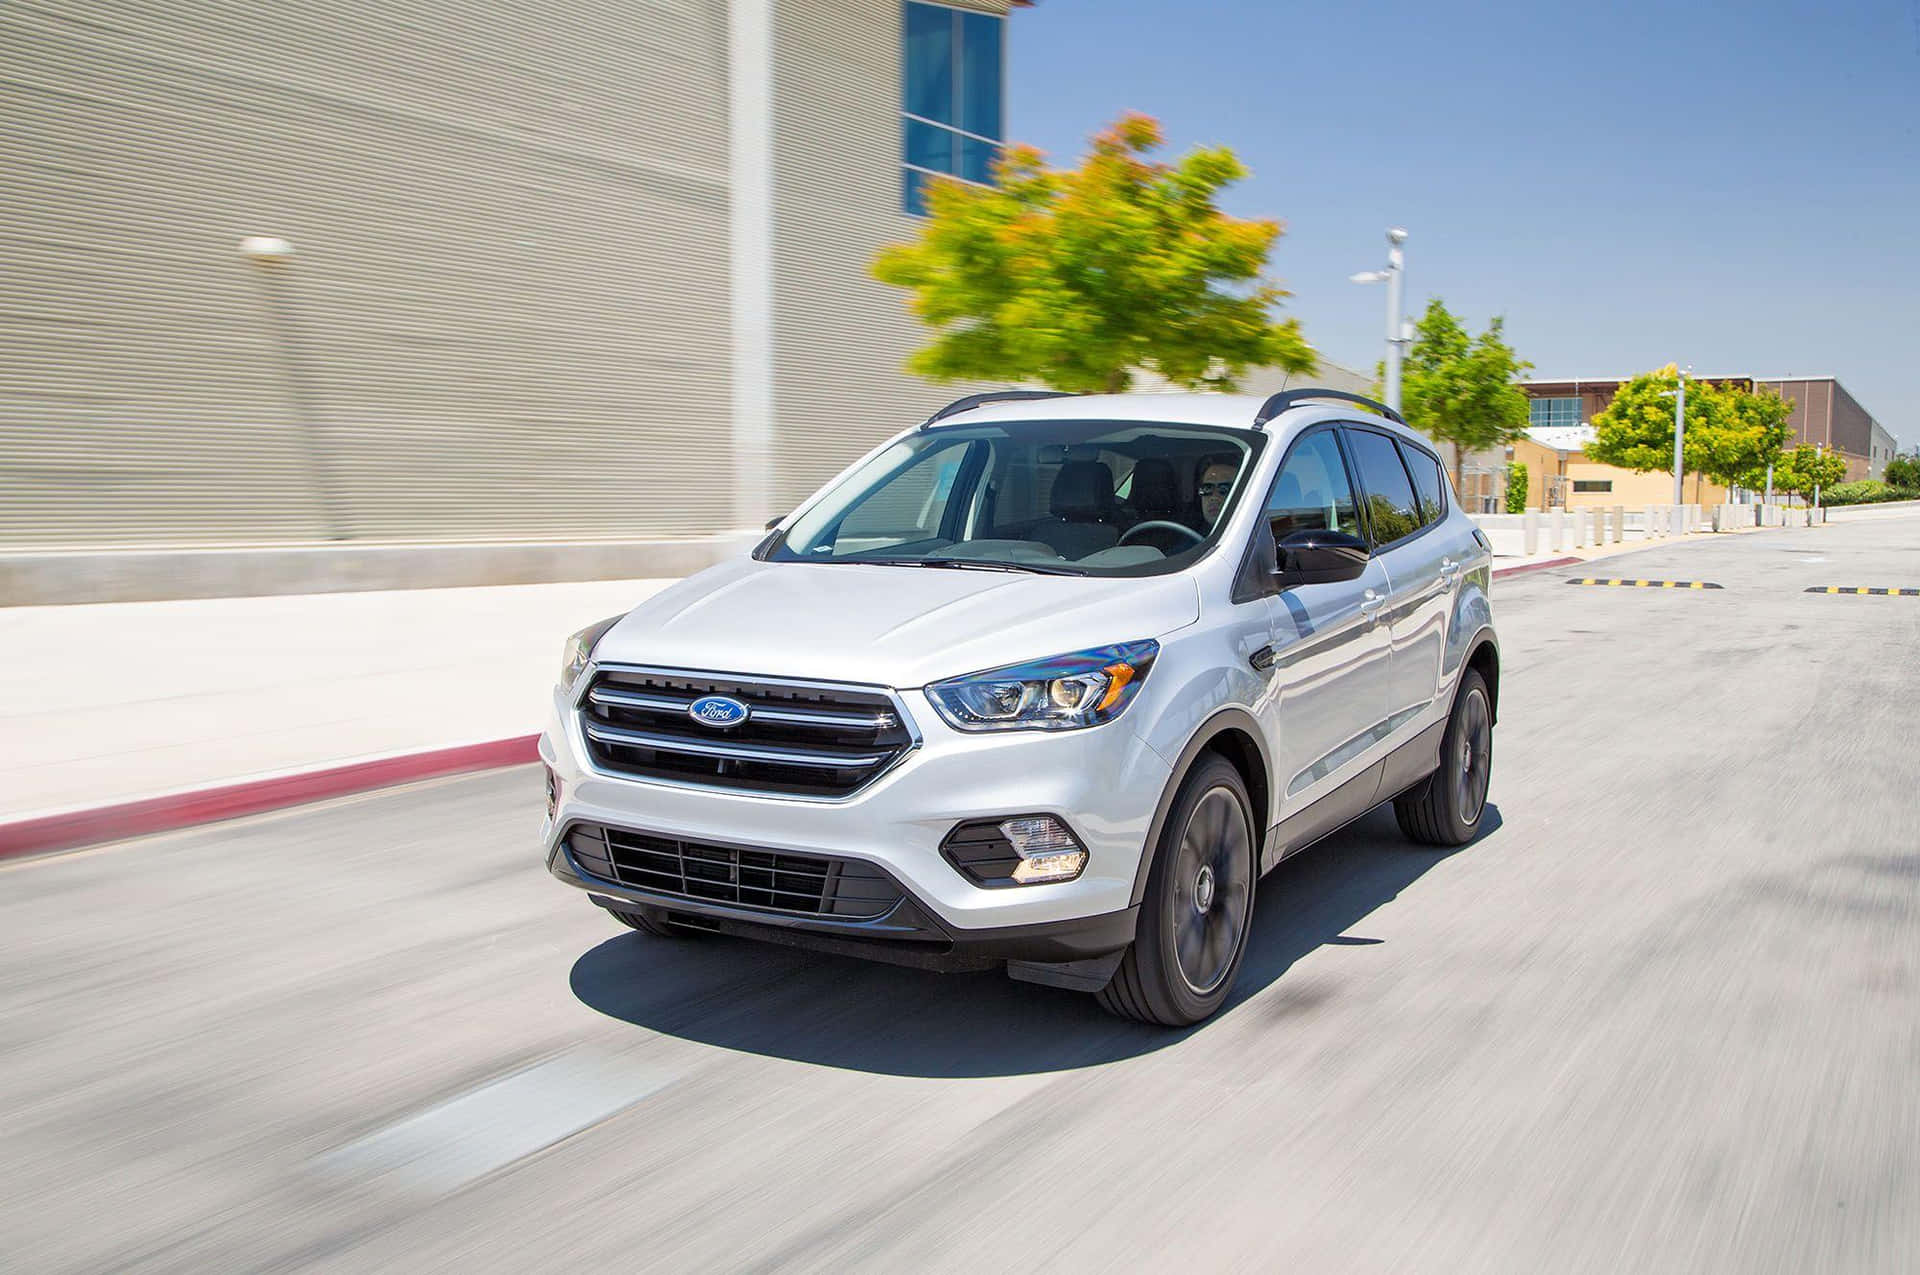 Sleek Ford Escape gliding down the road Wallpaper